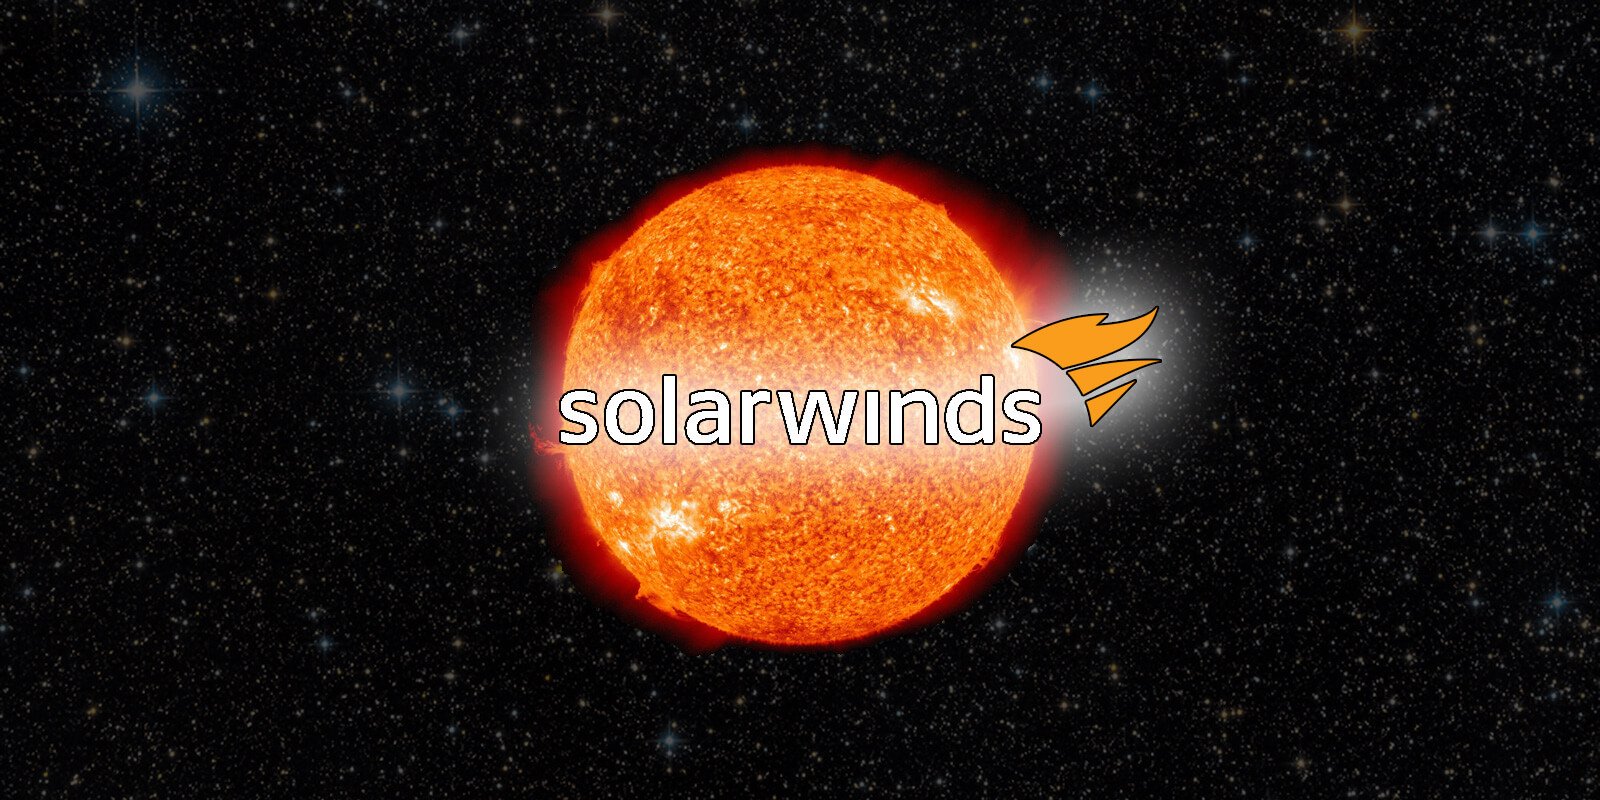 SolarWinds hackers compromised Denmark's central bank